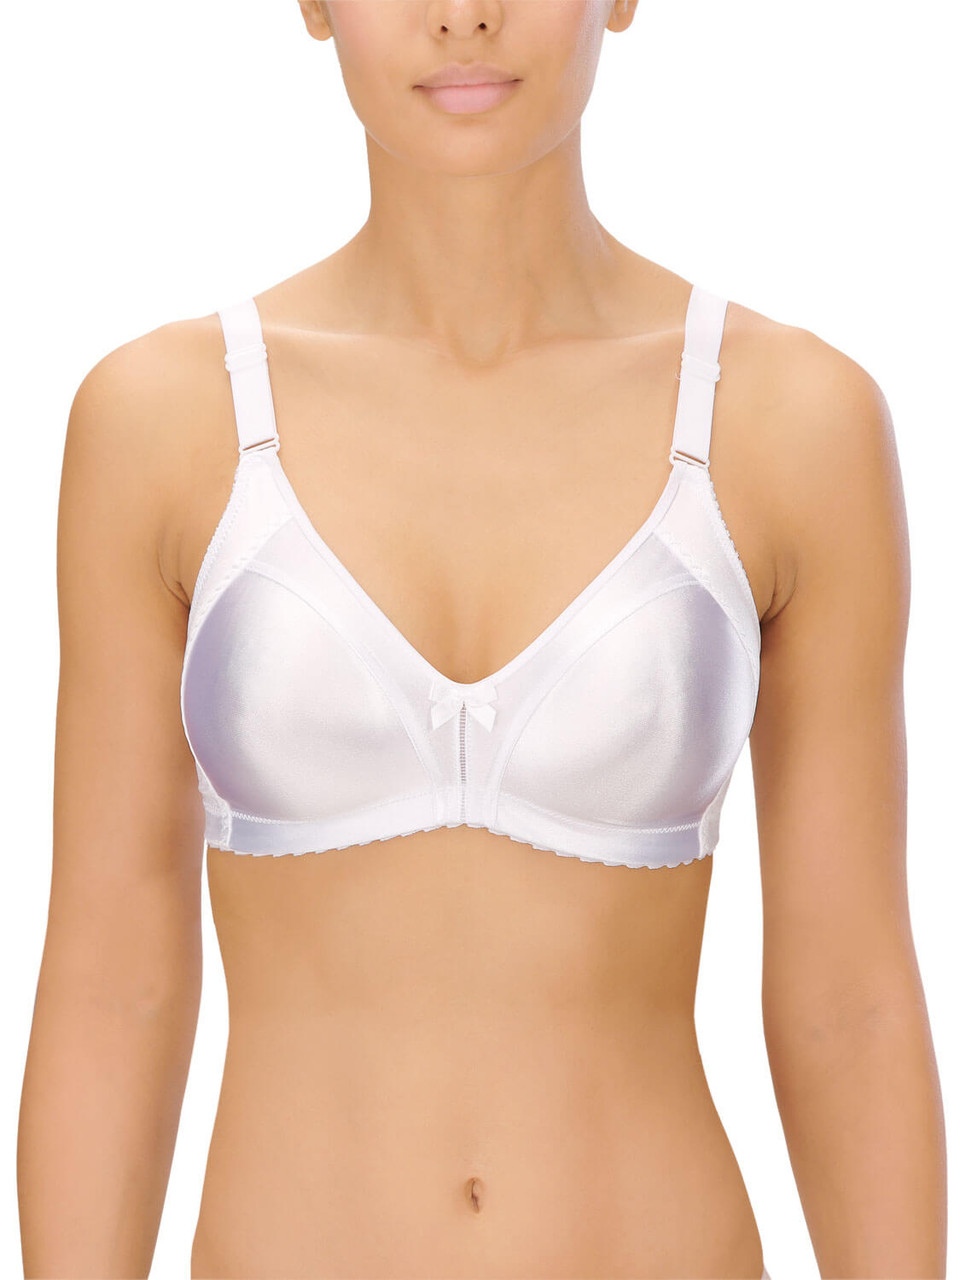 Naturana Women's Plus-Size Soft Cup Molded Non-Wired Minimizer Bra, Ivory,  38D